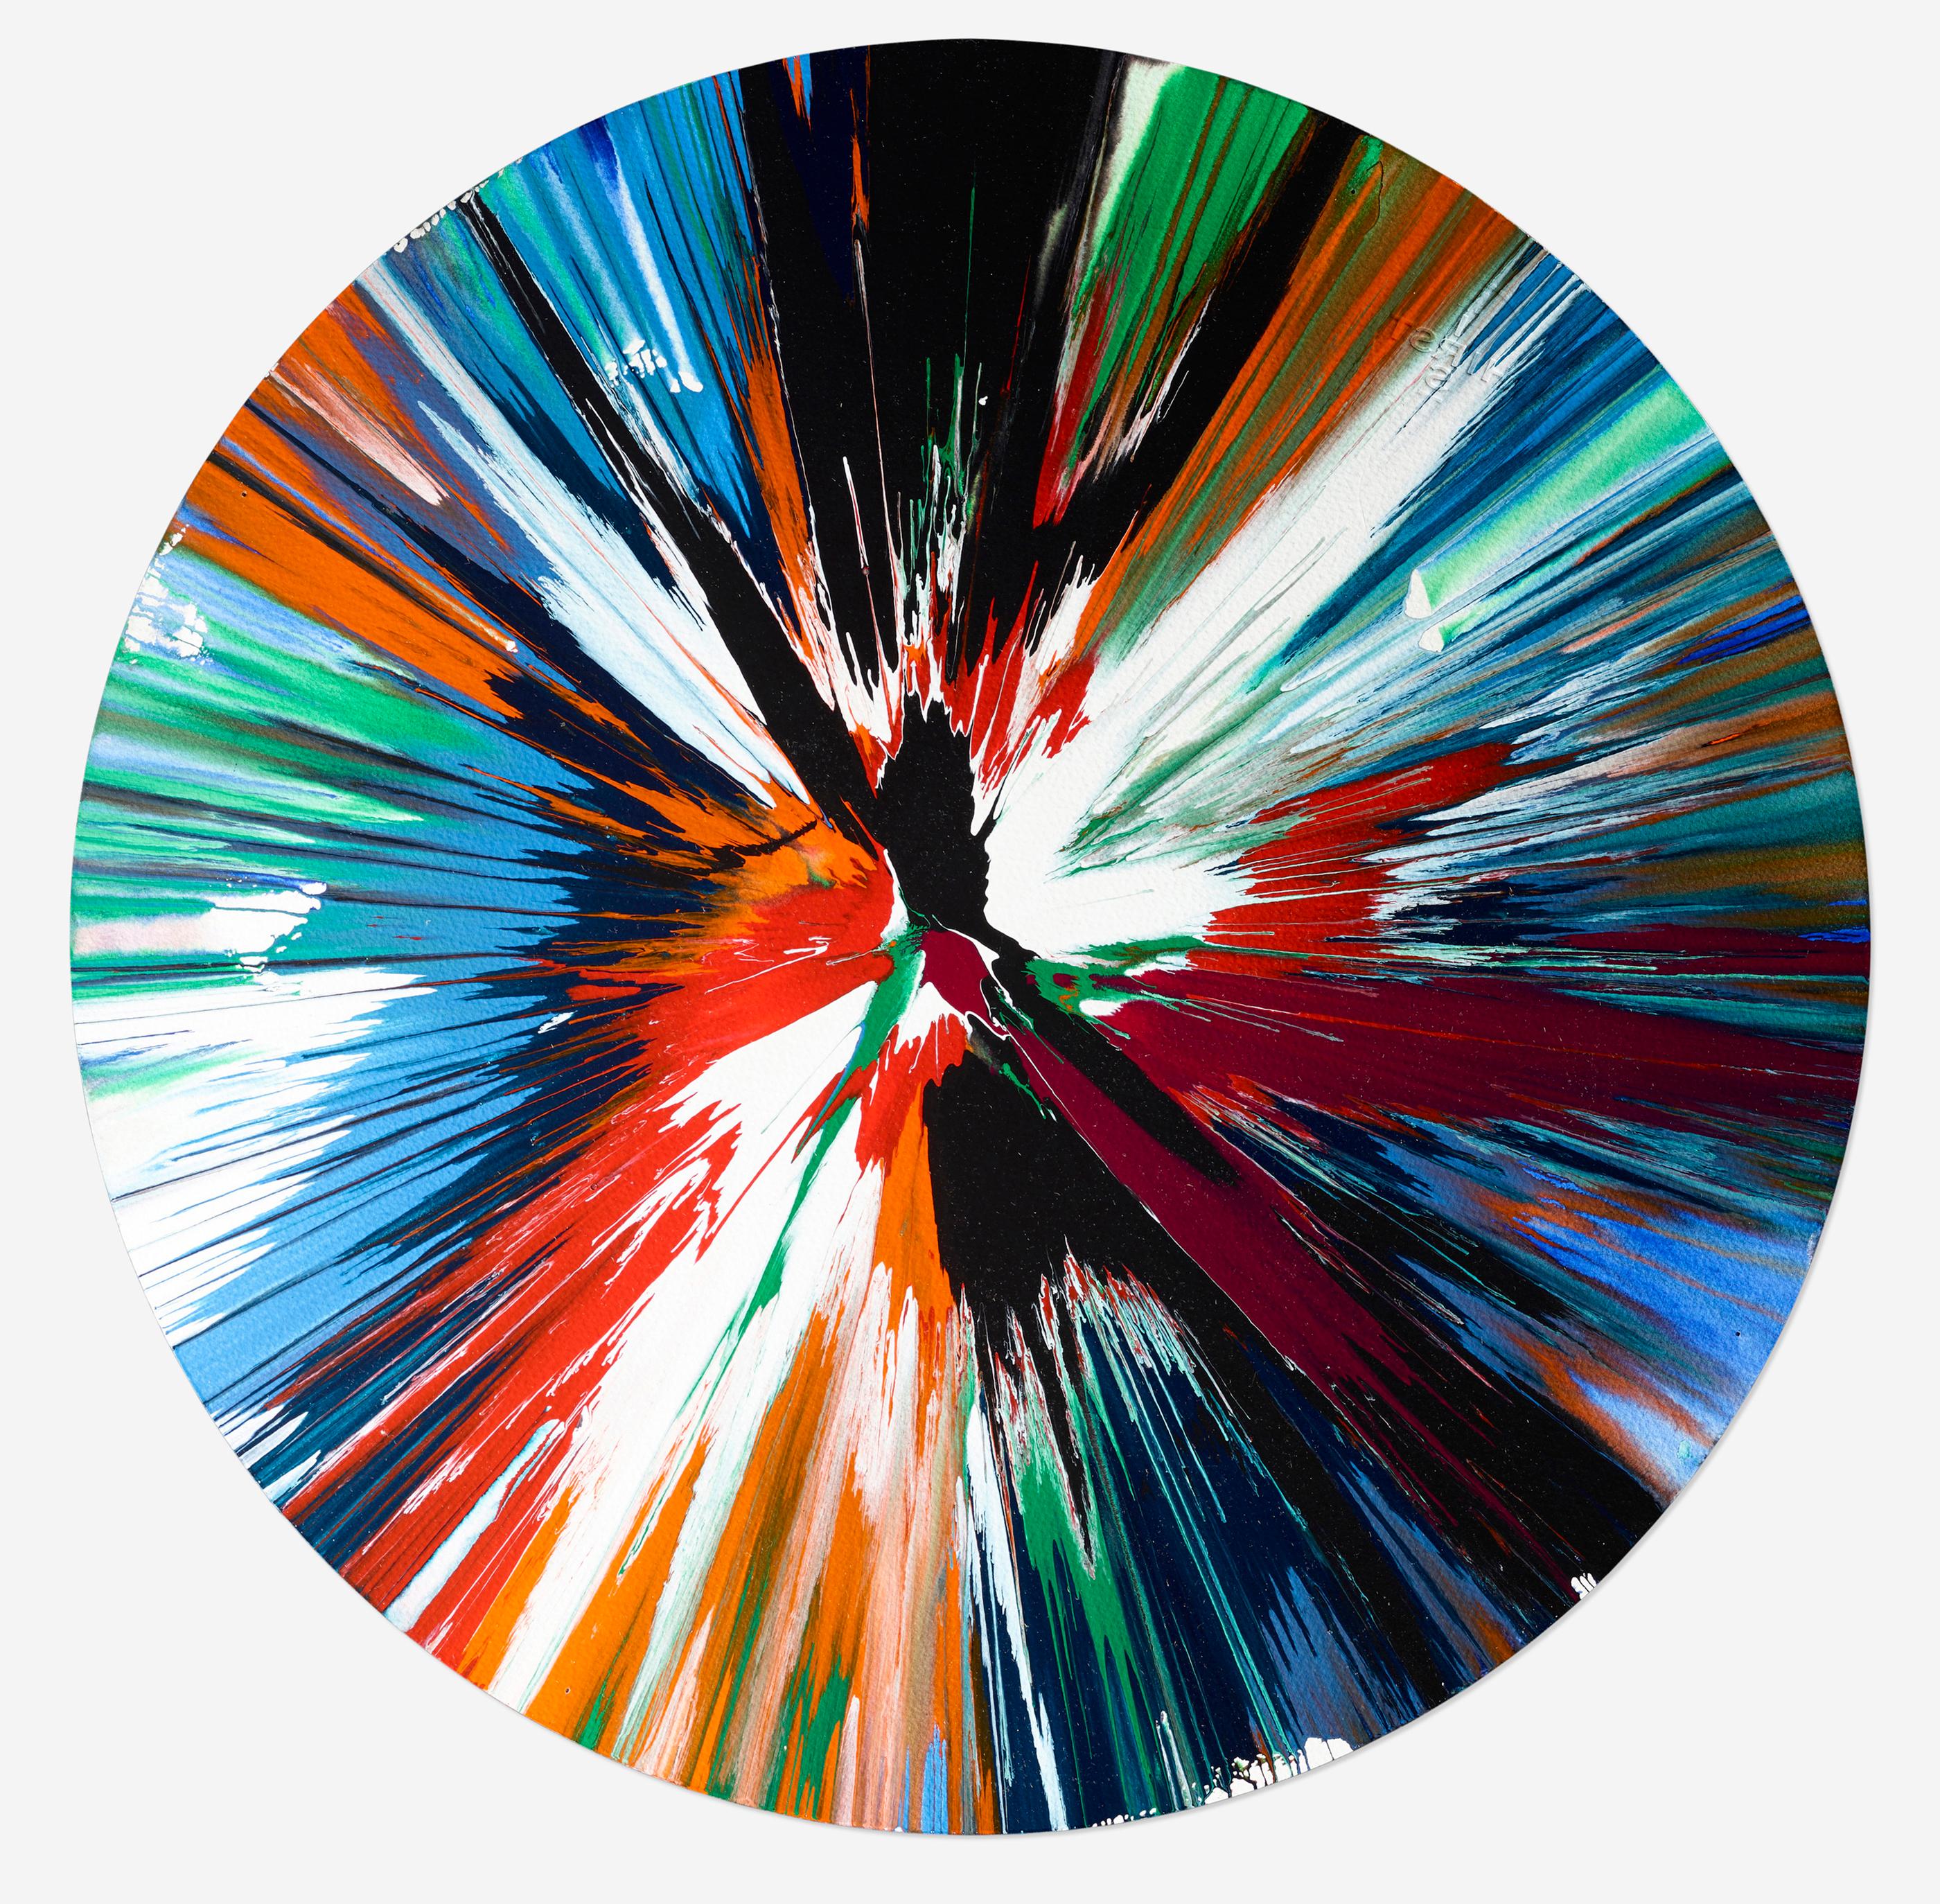 Damien Hirst Spin Painting, 2009 (Damien Hirst Circle):
A mesmerizing Damien Hirst Spin painting with explosions of vivid color amidst the timeless, mysterious form of a standout Hirst circle. This Damien Hirst Spin painting originates from Hirst’s